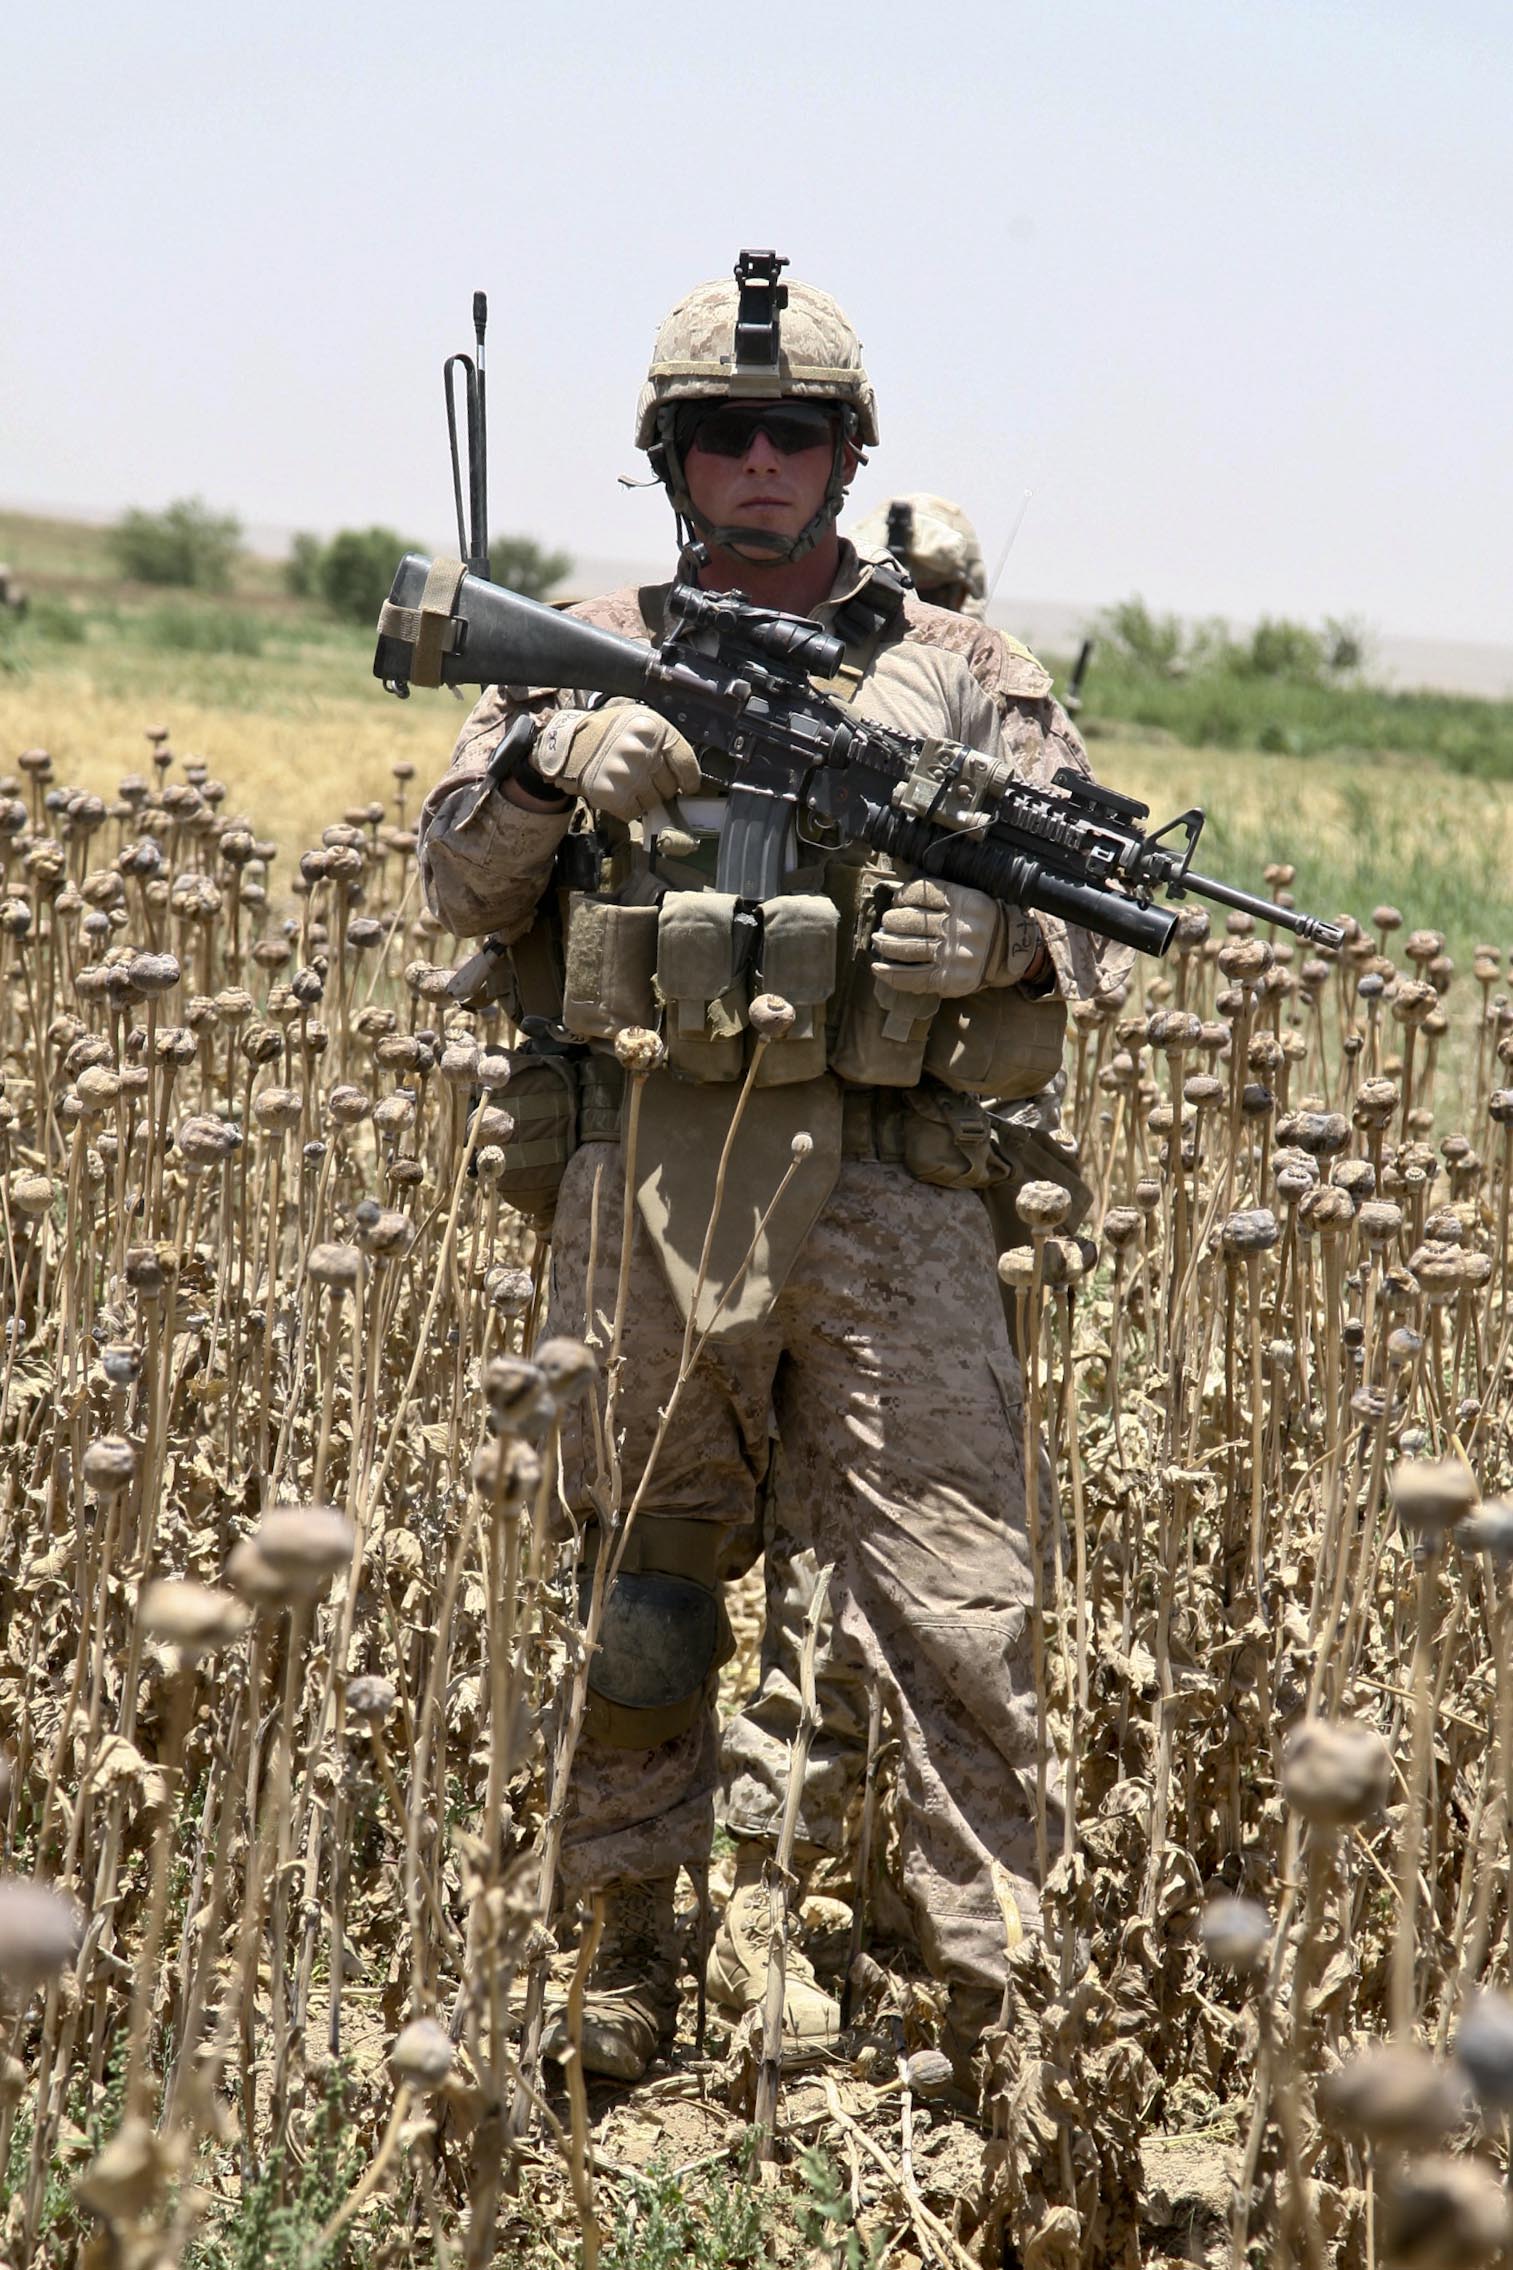 U.S. Marine Corps Cpl. James K. Peters stands in an opium poppy field while performing a foot patrol at Sangin, Afghanistan, May 19, 2011. (U.S. Marine Corps photo by Cpl. Jeremy C. Harris/Released)